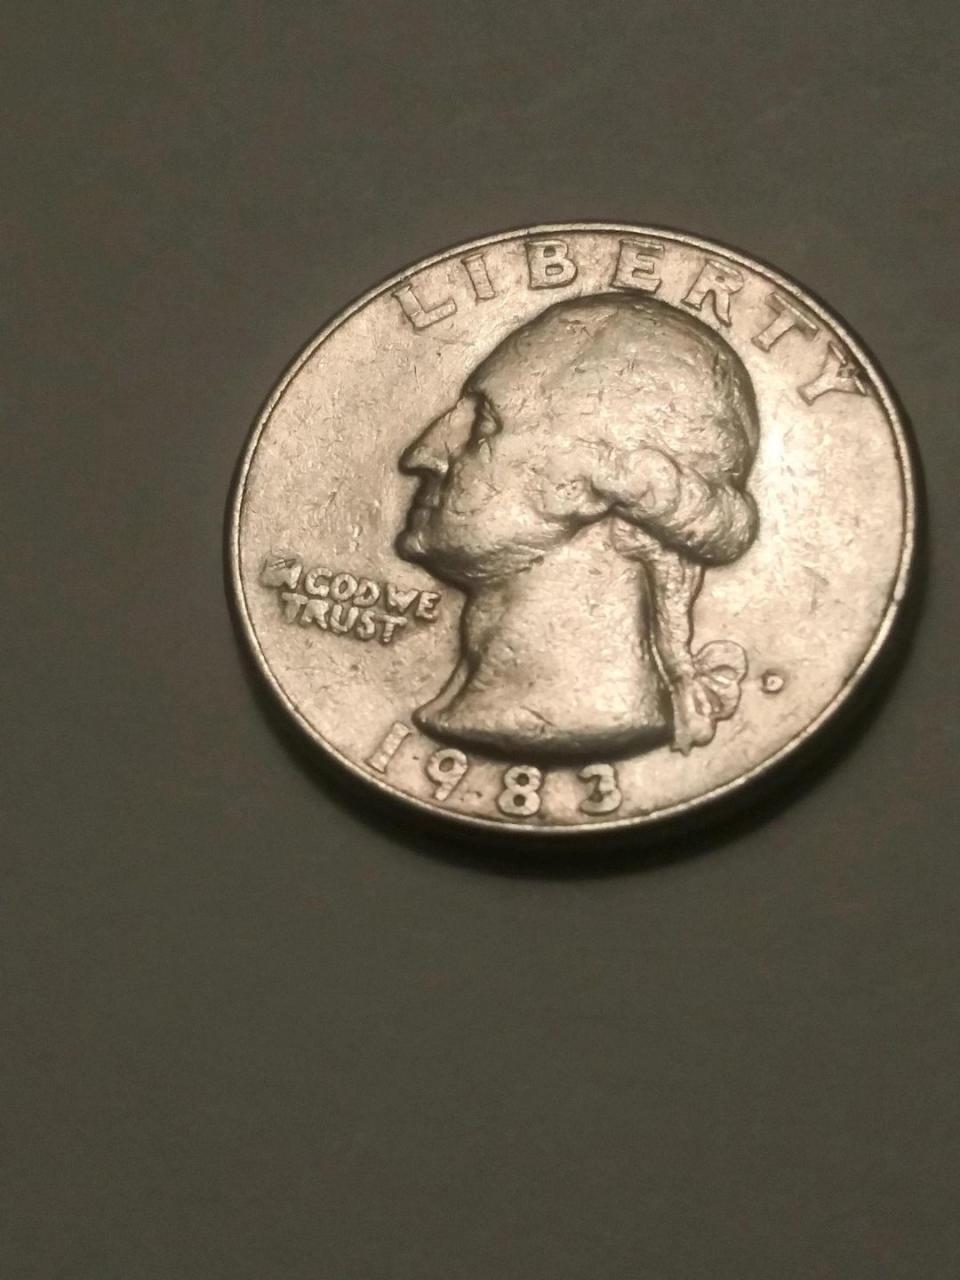 1983 Quarter...with mistakes